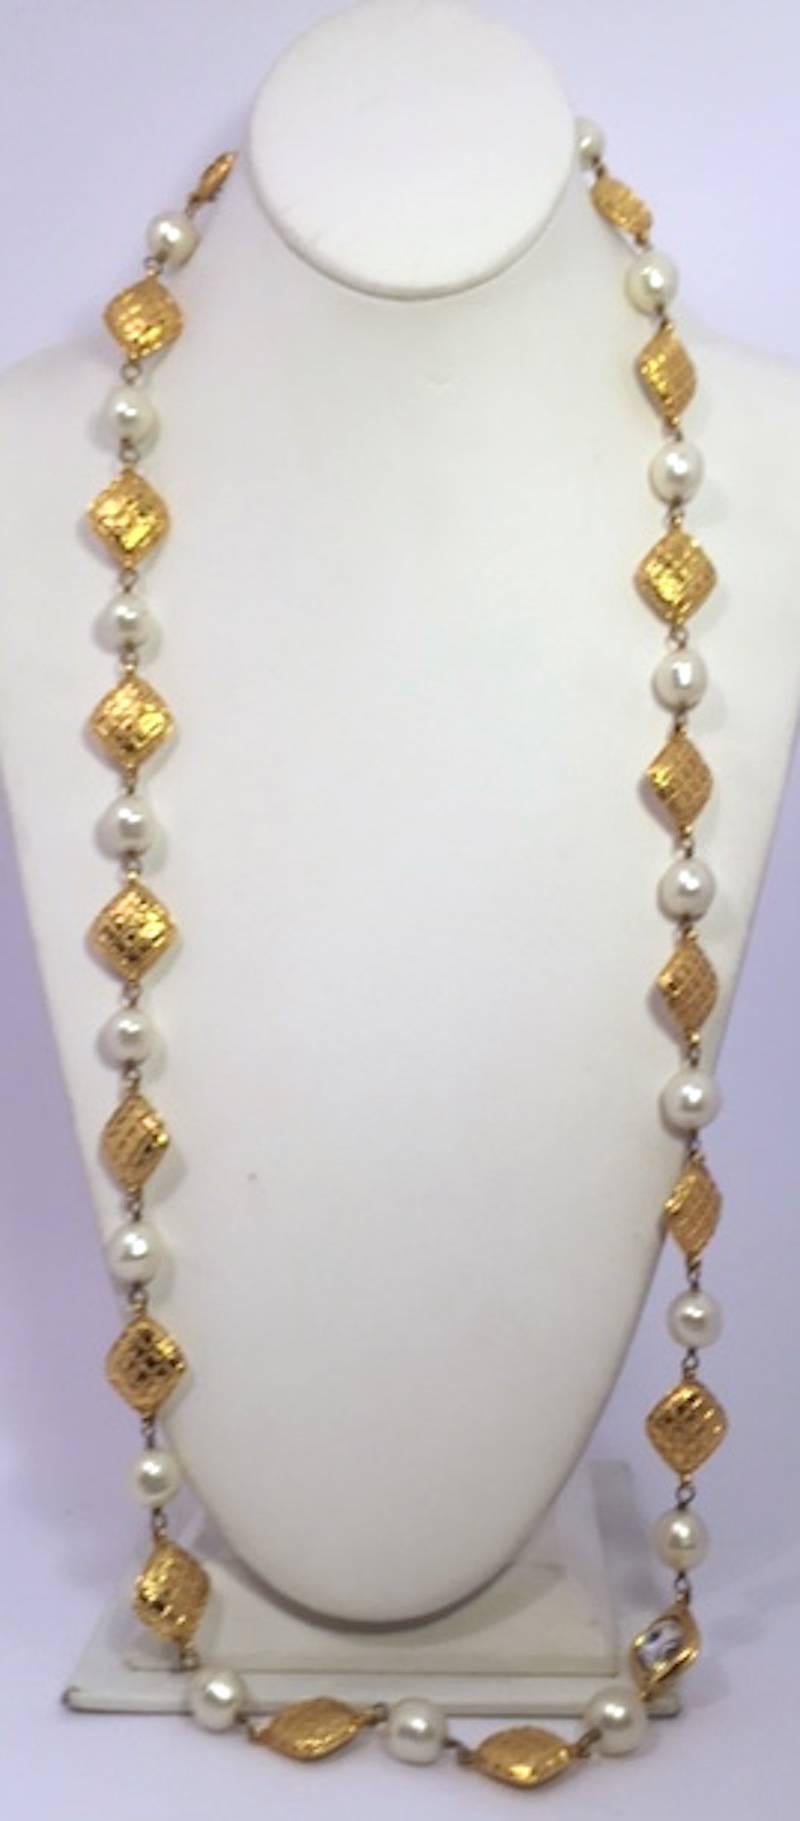 Women's Chanel Long Gold, Pearl and Crystal Necklace